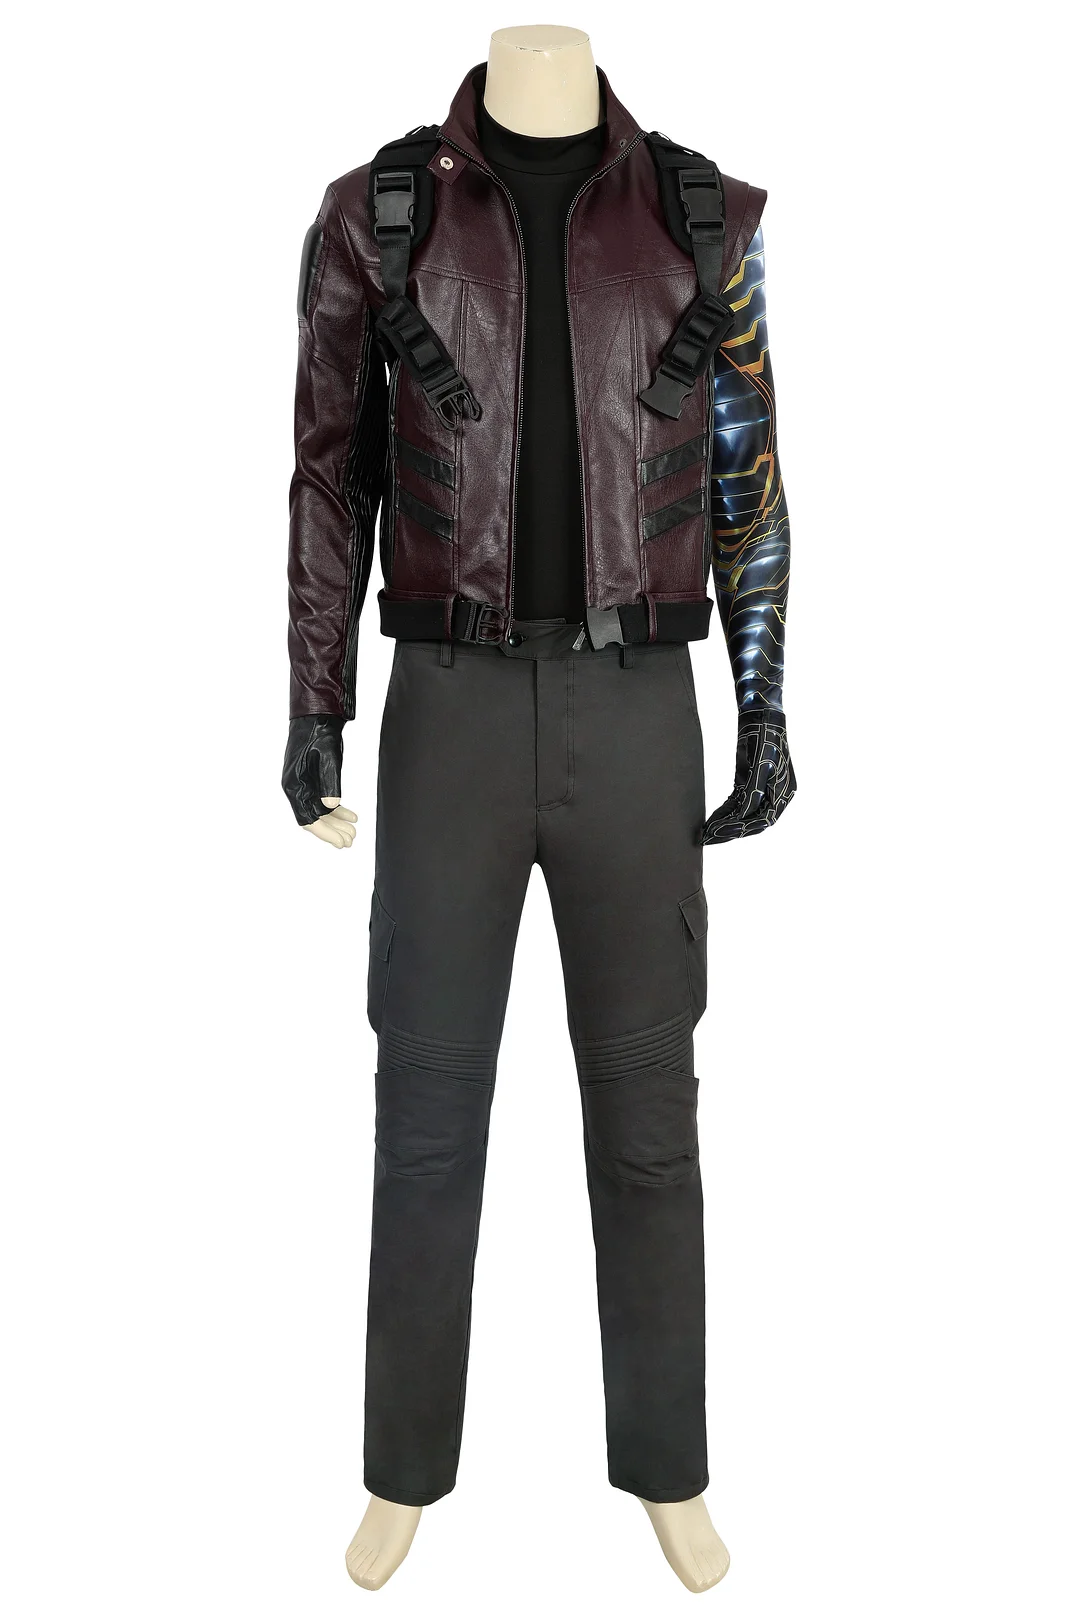 Winter Soldier Cosplay Costumes The Falcon and the Winter Soldier Bucky Barnes Suit